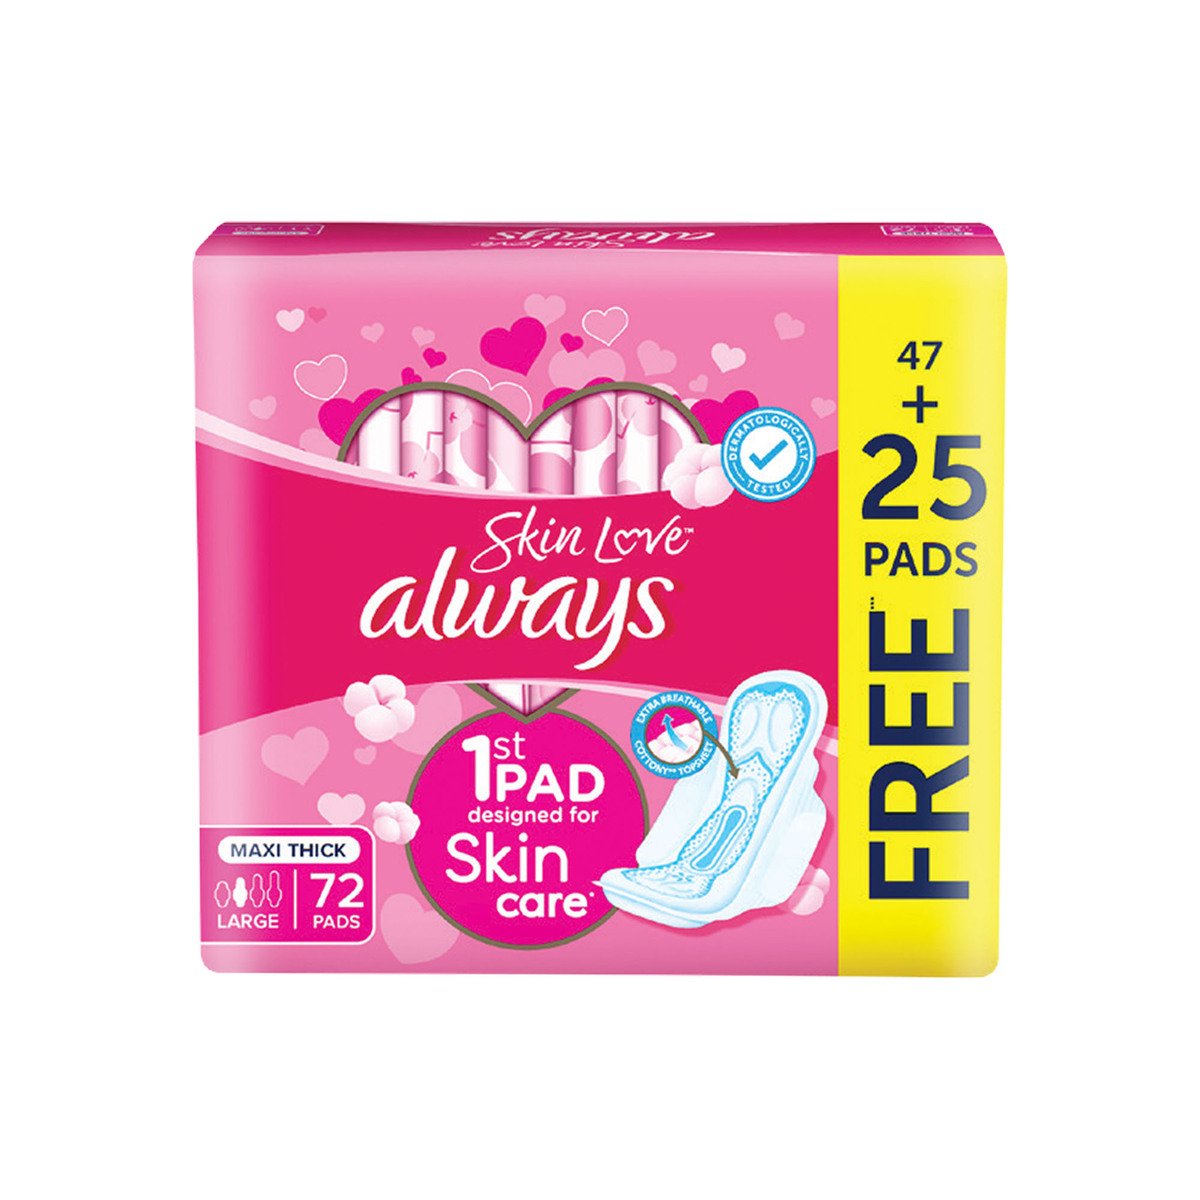 Always Skin Love Maxi Thick Large Pads 72 pcs